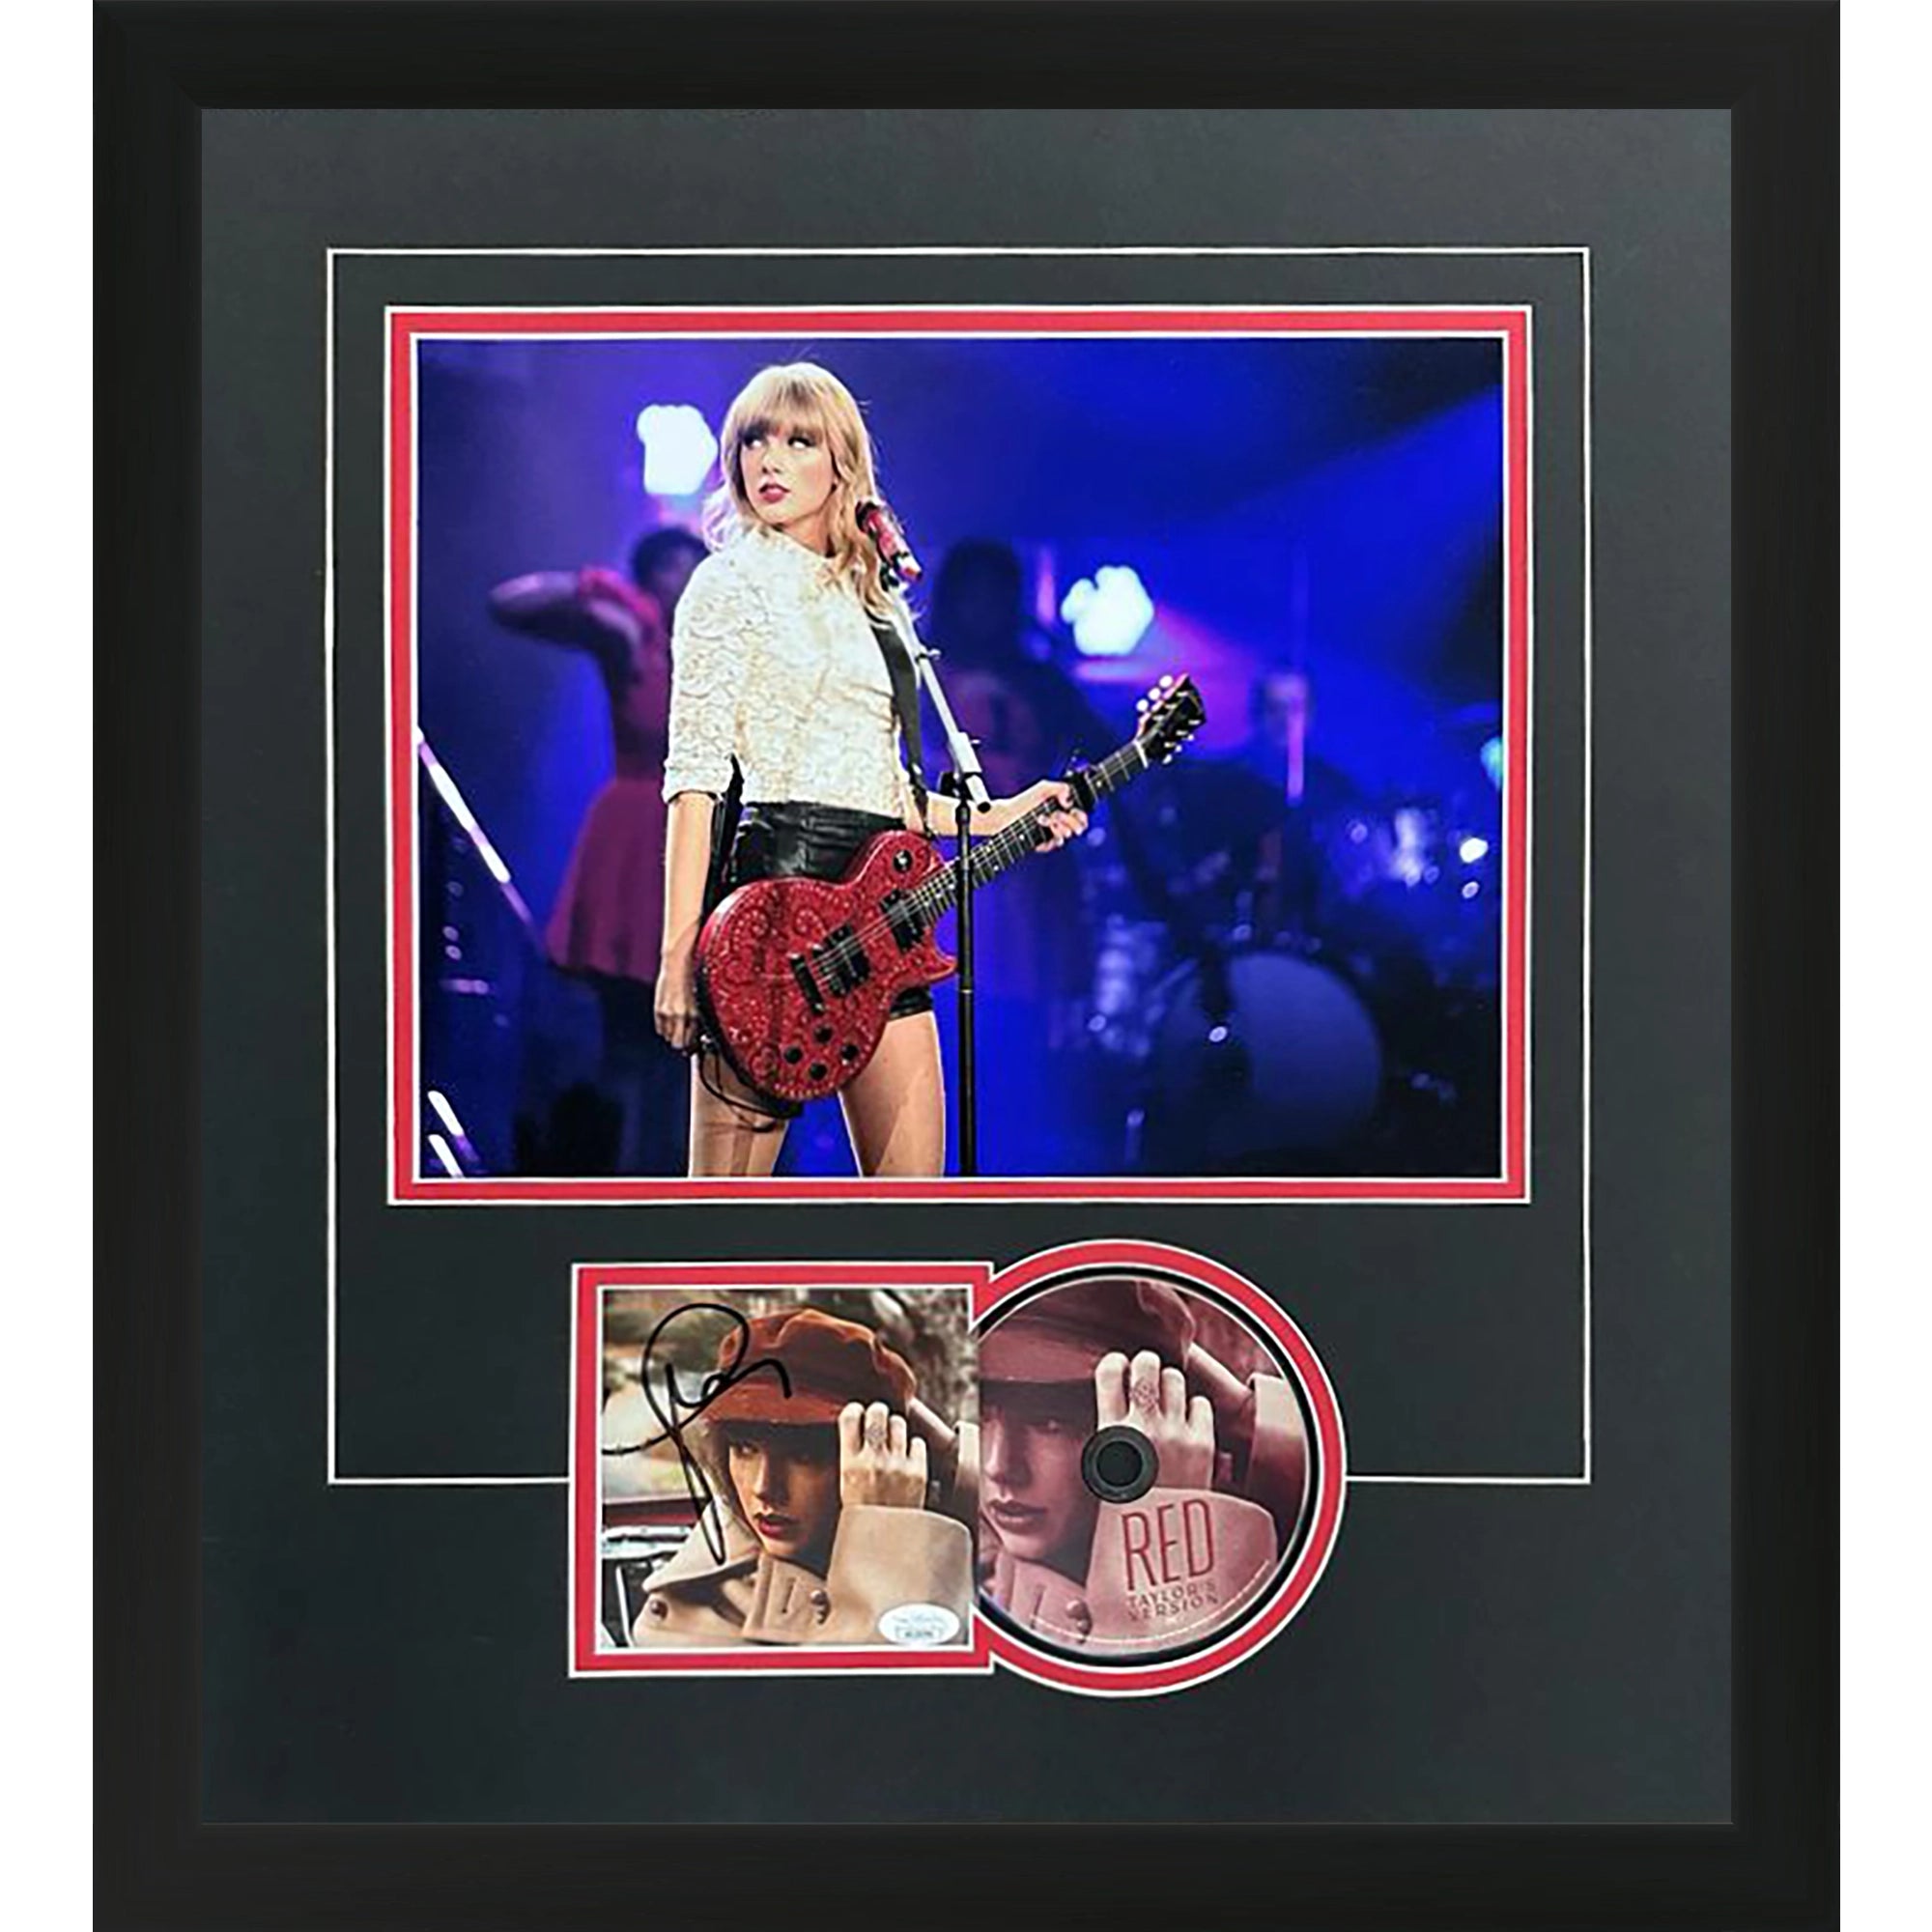 Taylor Swift Autographed Red Deluxe Framed CD with 11x14 Photo - JSA